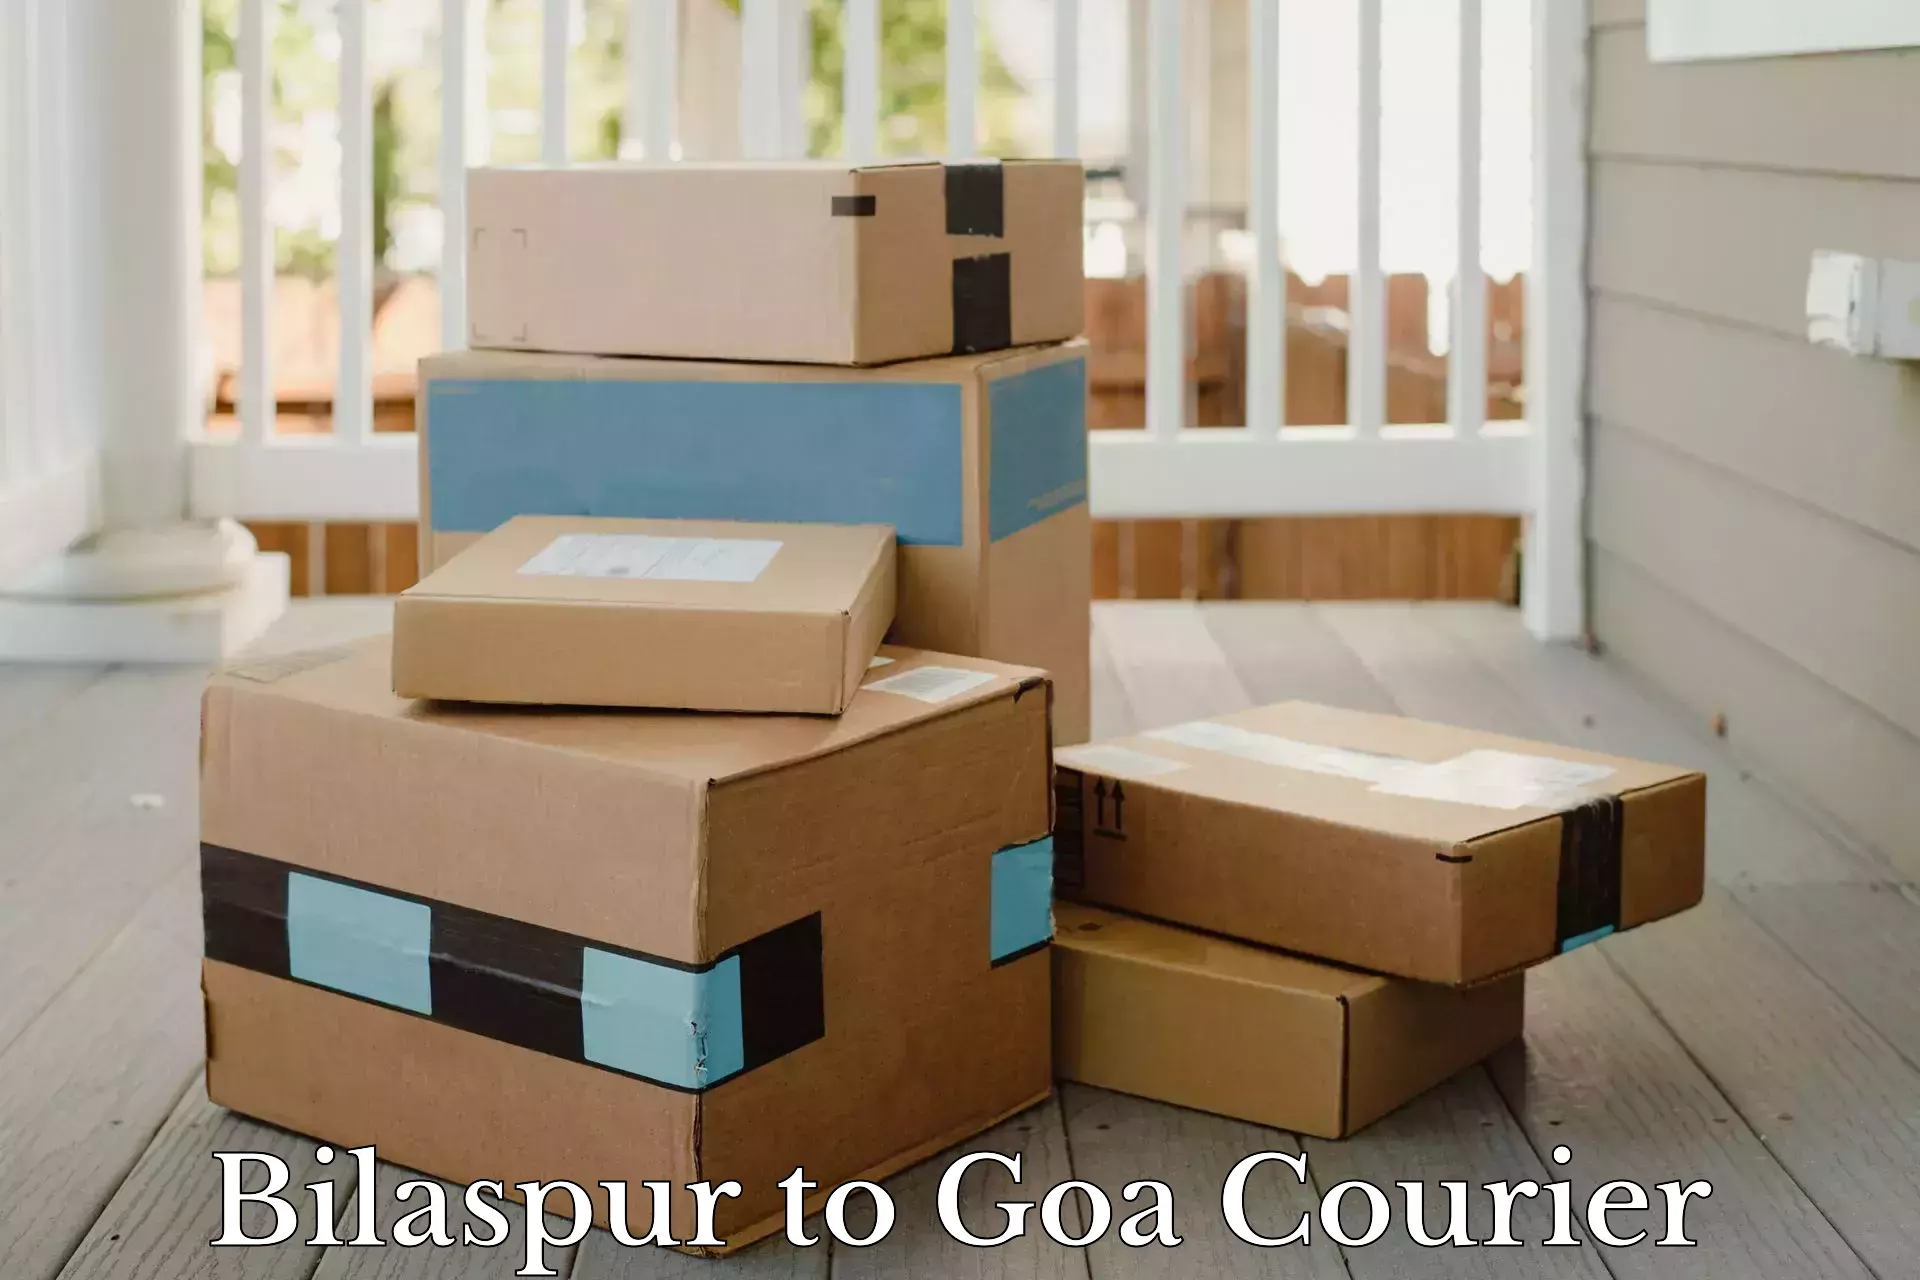 Flexible delivery schedules Bilaspur to Goa